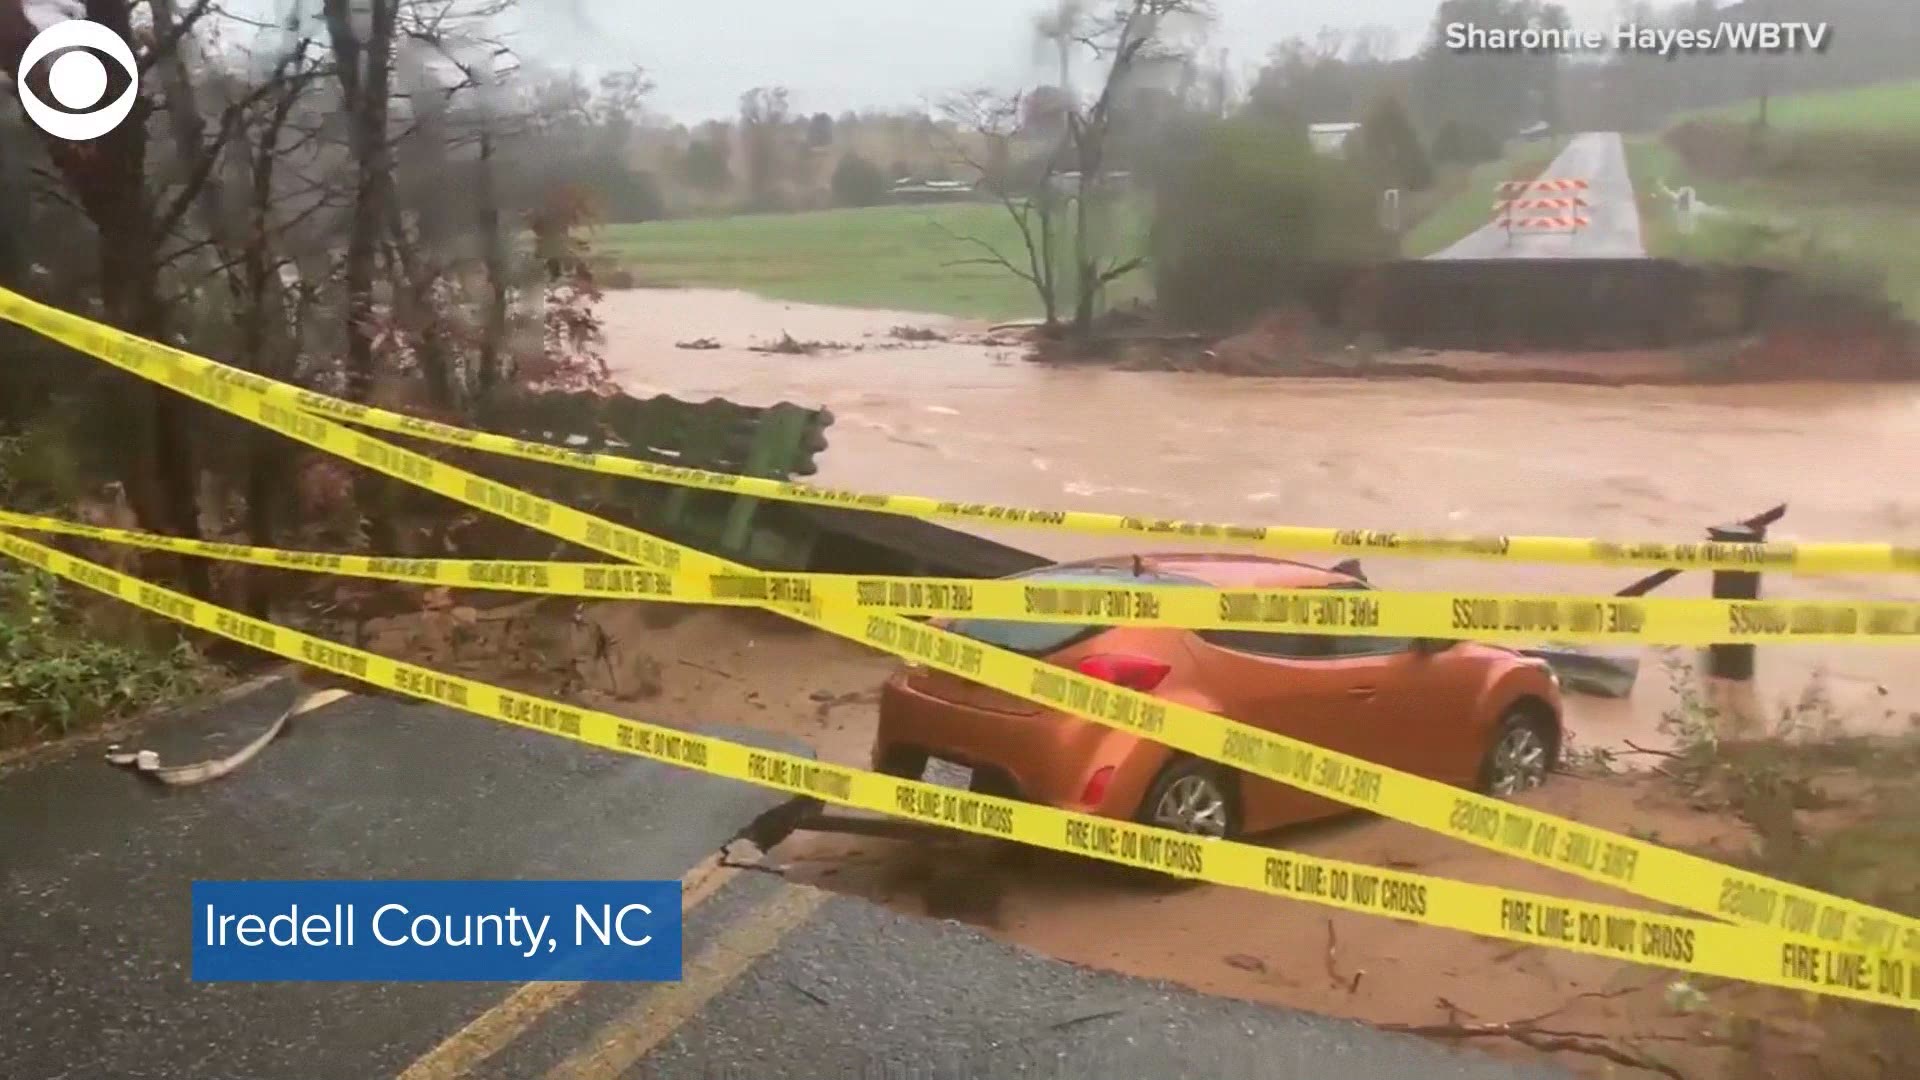 Flooding washed out a bridge in Iredell County, North Carolina Thursday.